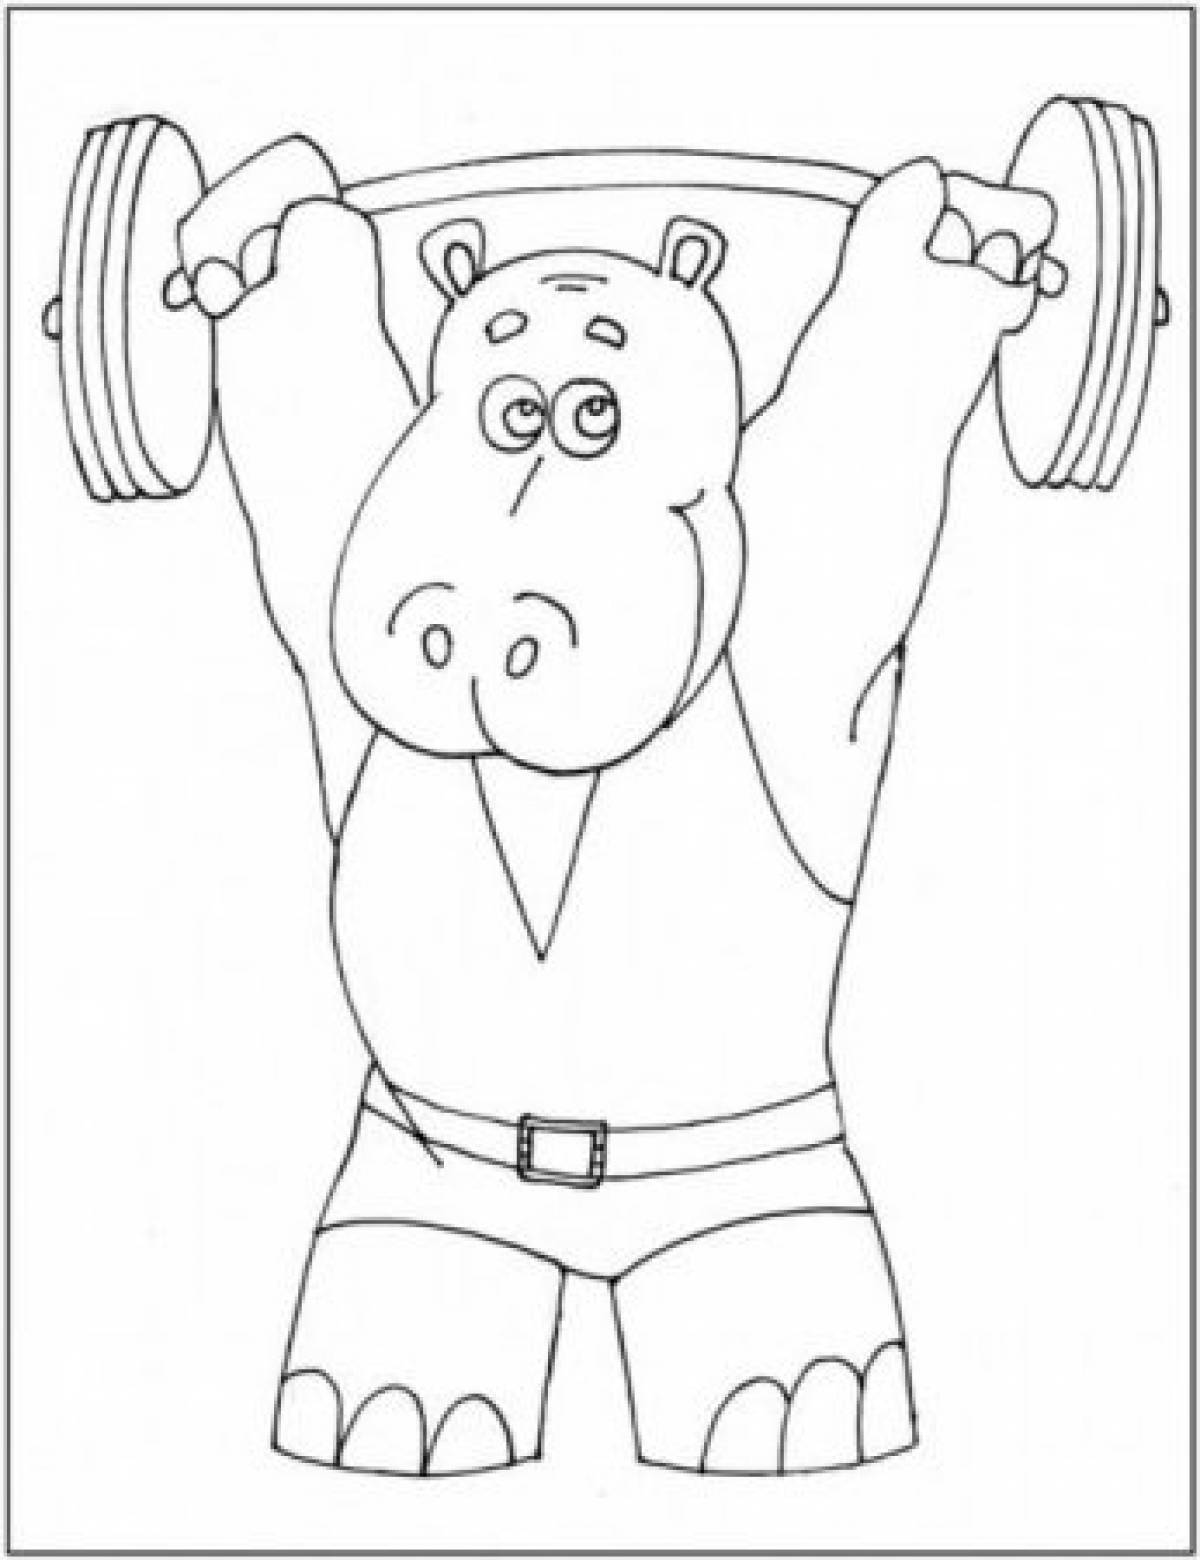 Healthy lifestyle coloring page